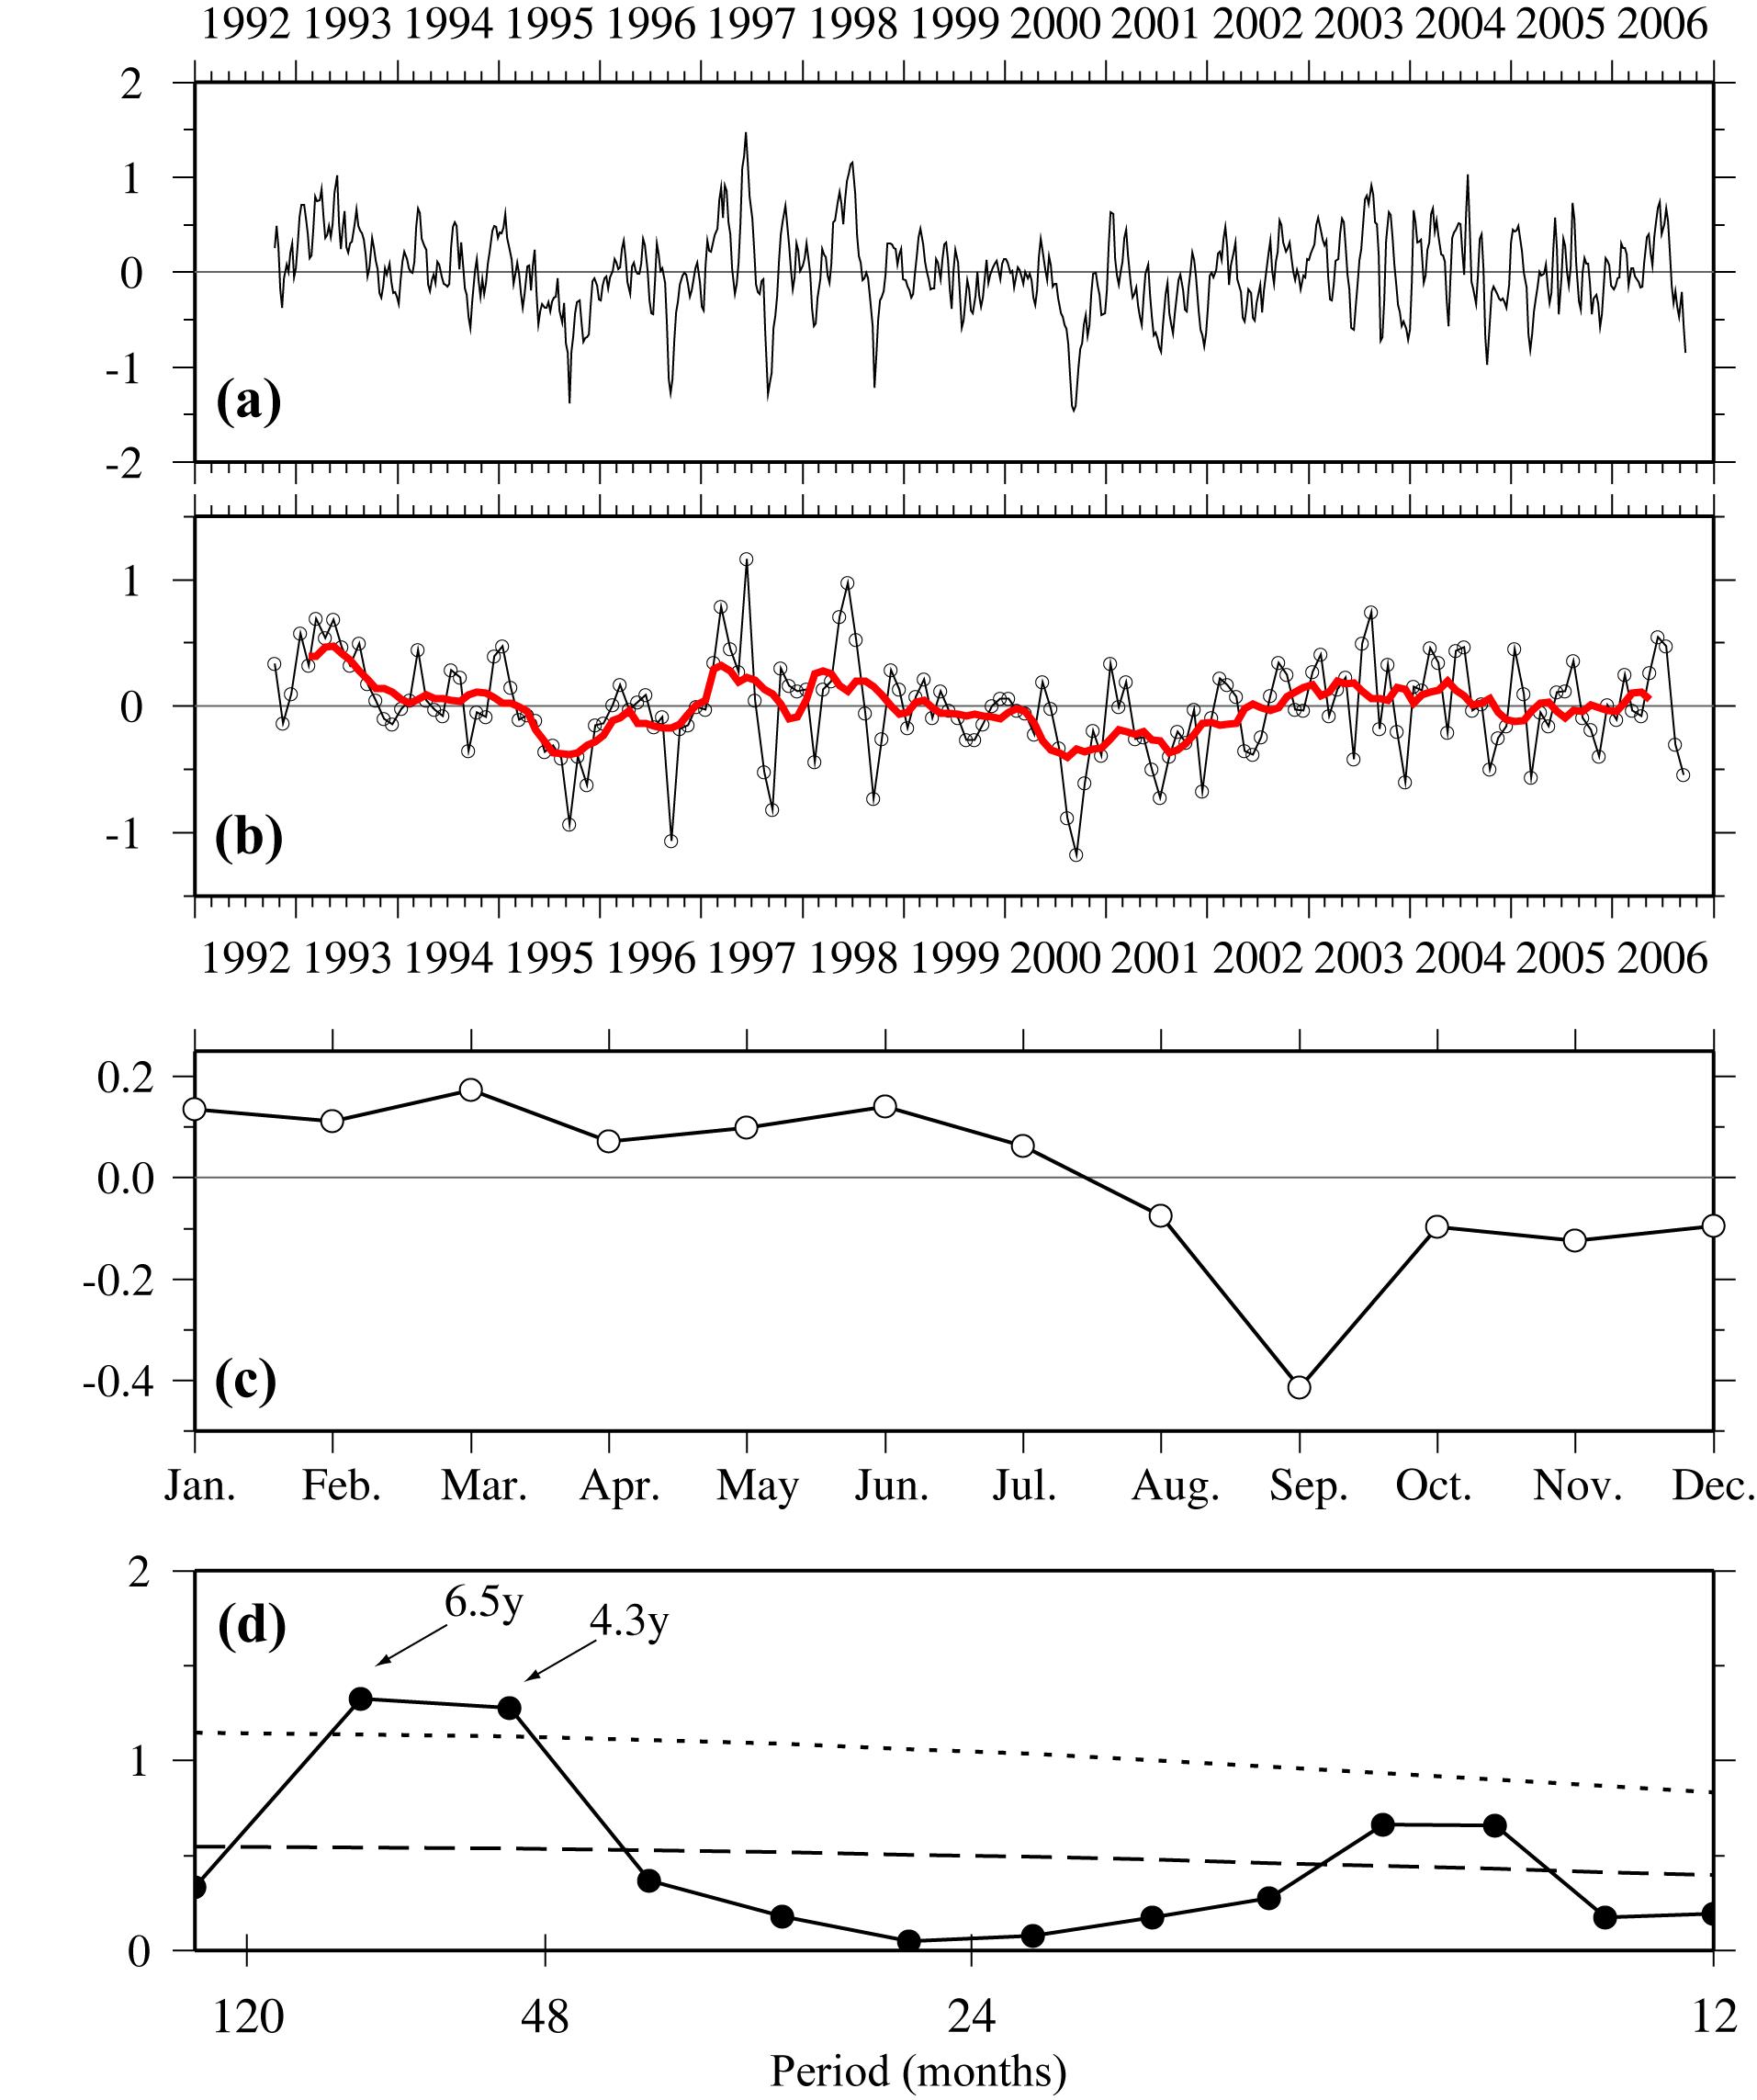 Raw time series of (a) transport anomalies in 10 m s calculated at intervals of 7 days, (b) filtered monthly transport anomalies superimposed with a 9-month moving average (red line), (c) mean seasonal transport anomalies across the section A shown in Fig. 1, and (d) variance-preserving spectrum of monthly transport anomalies for periods greater than 1 year. Dotted line stands for the 95 % significance level.